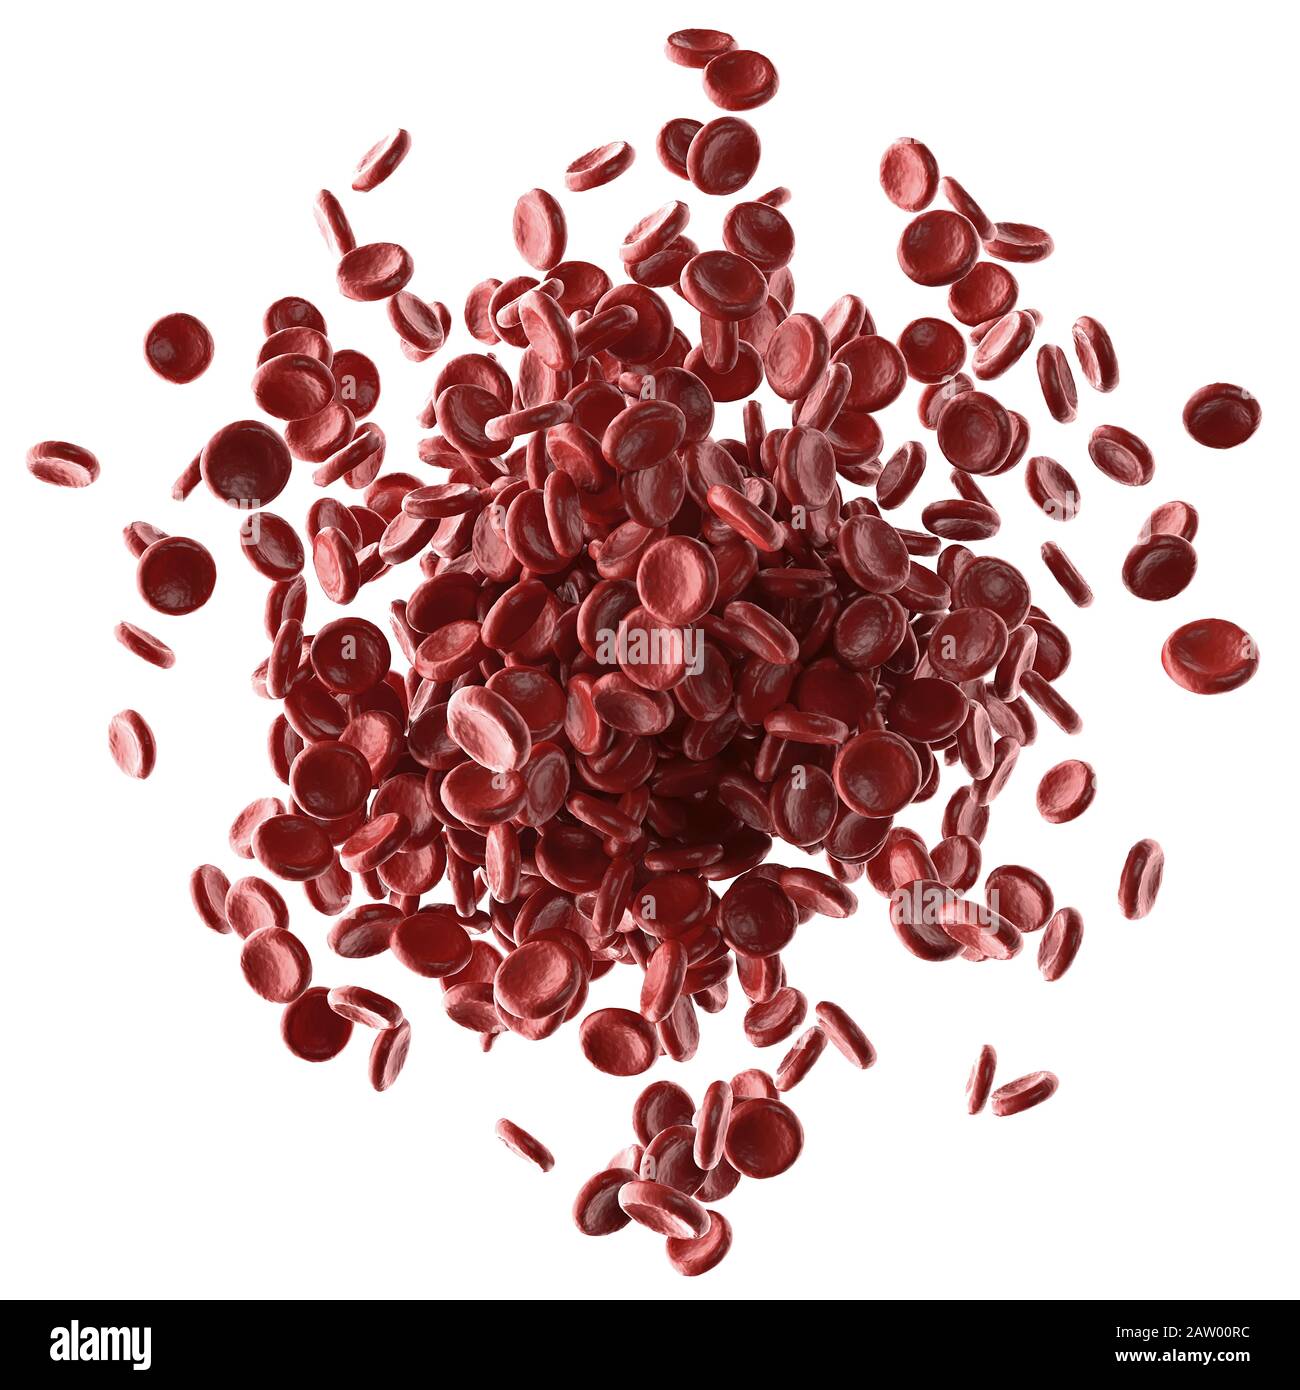 Red blood cells spilling out on white background. 3D illustration, conceptual image. Clipping path included. Stock Photo